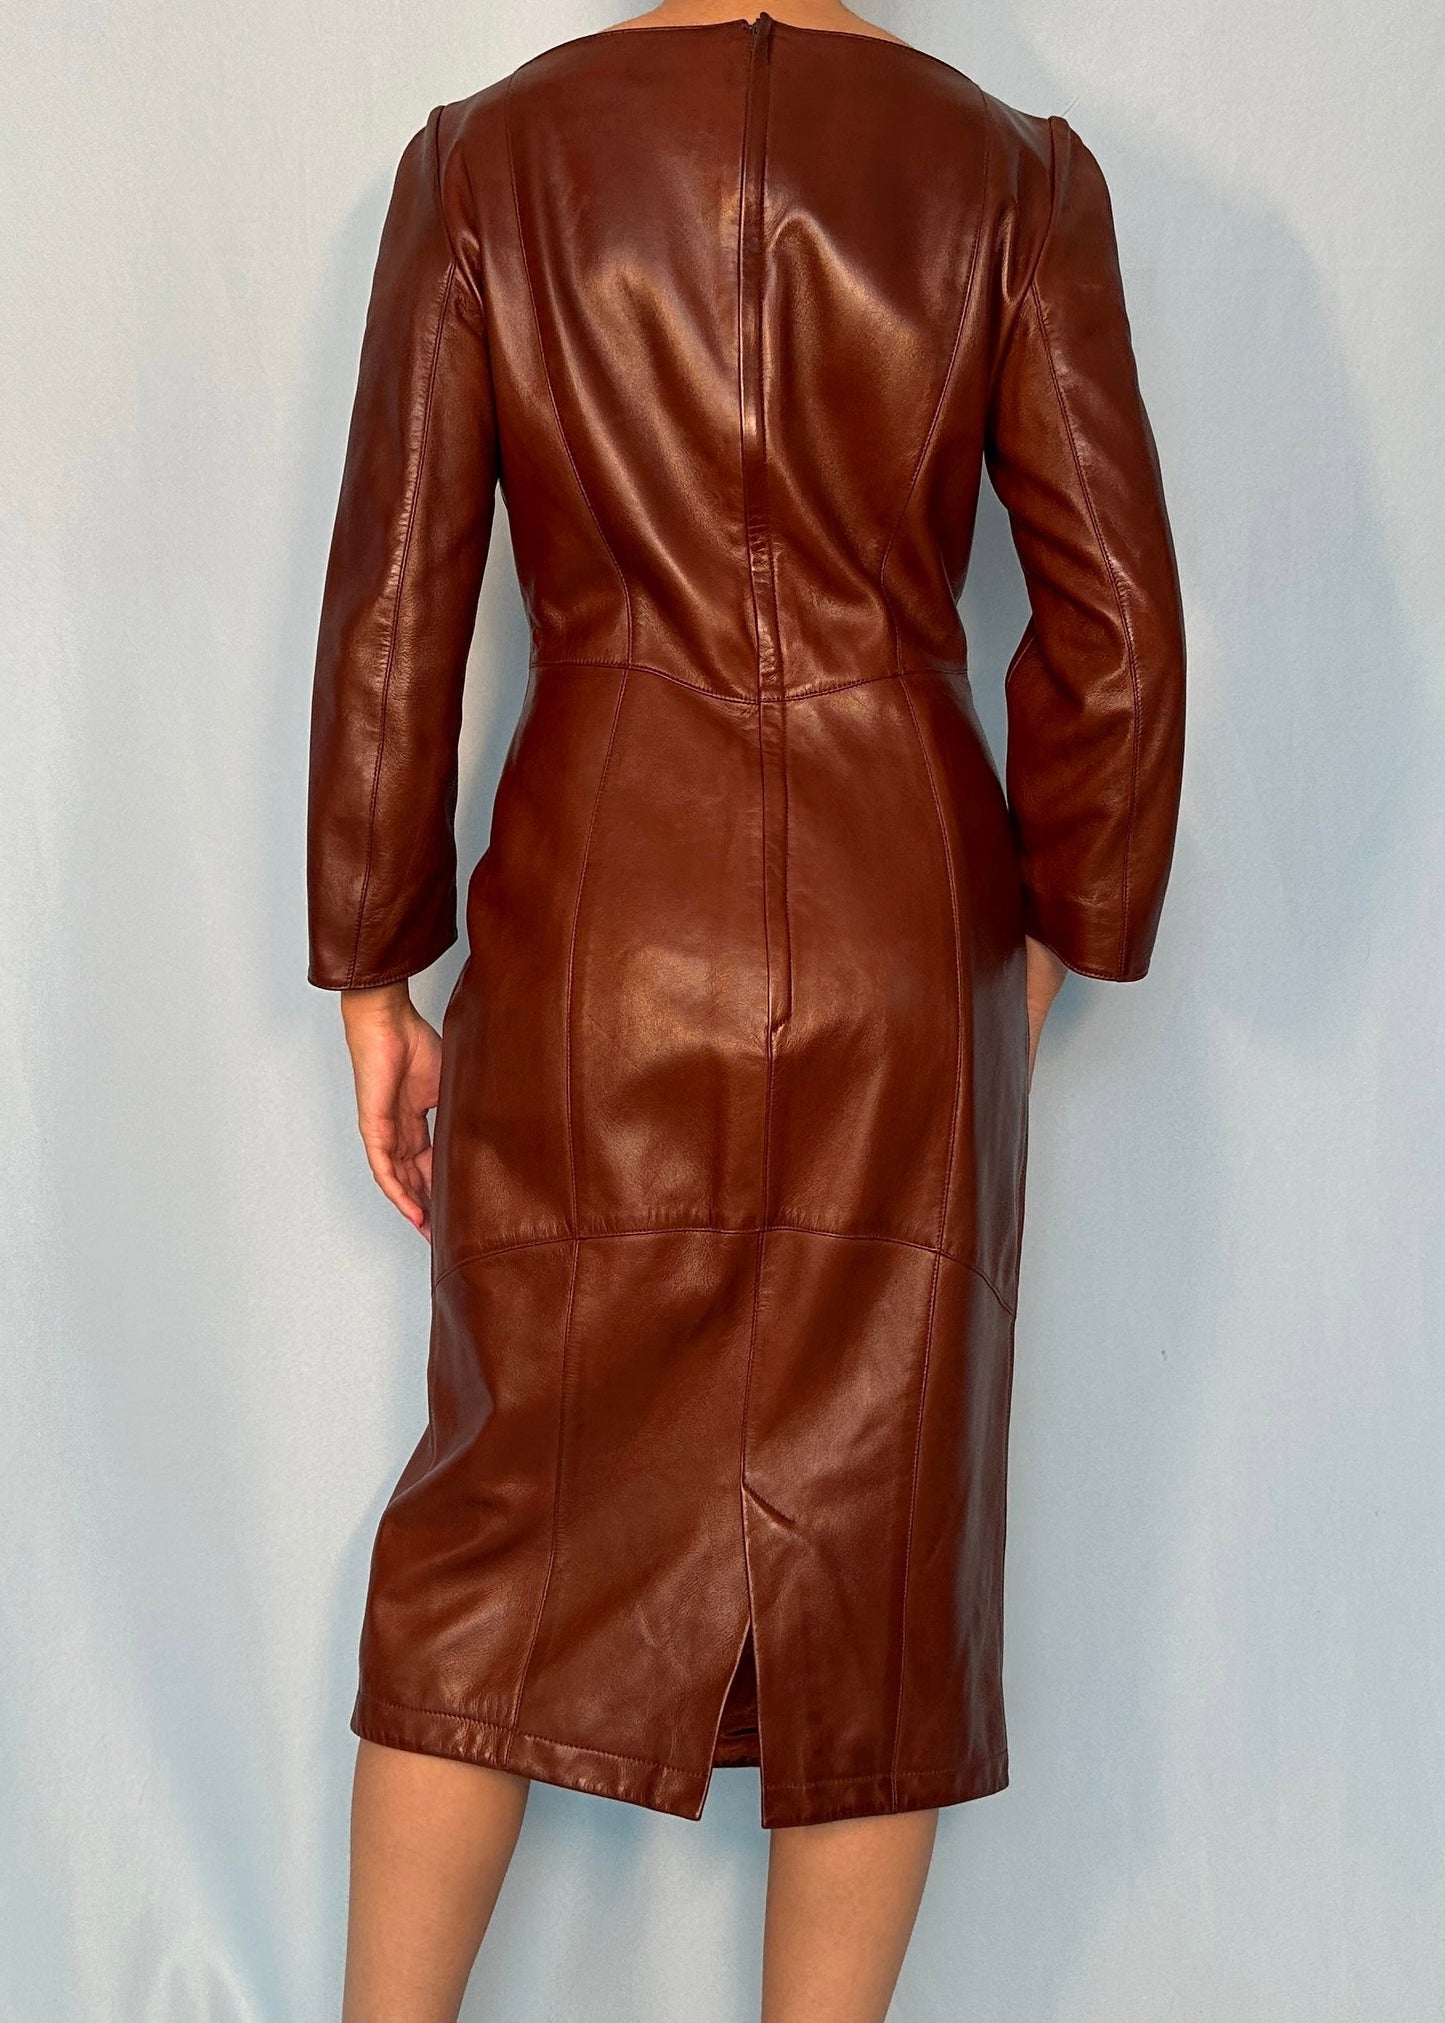 Thierry Mugler Brown Leather Contour Dress